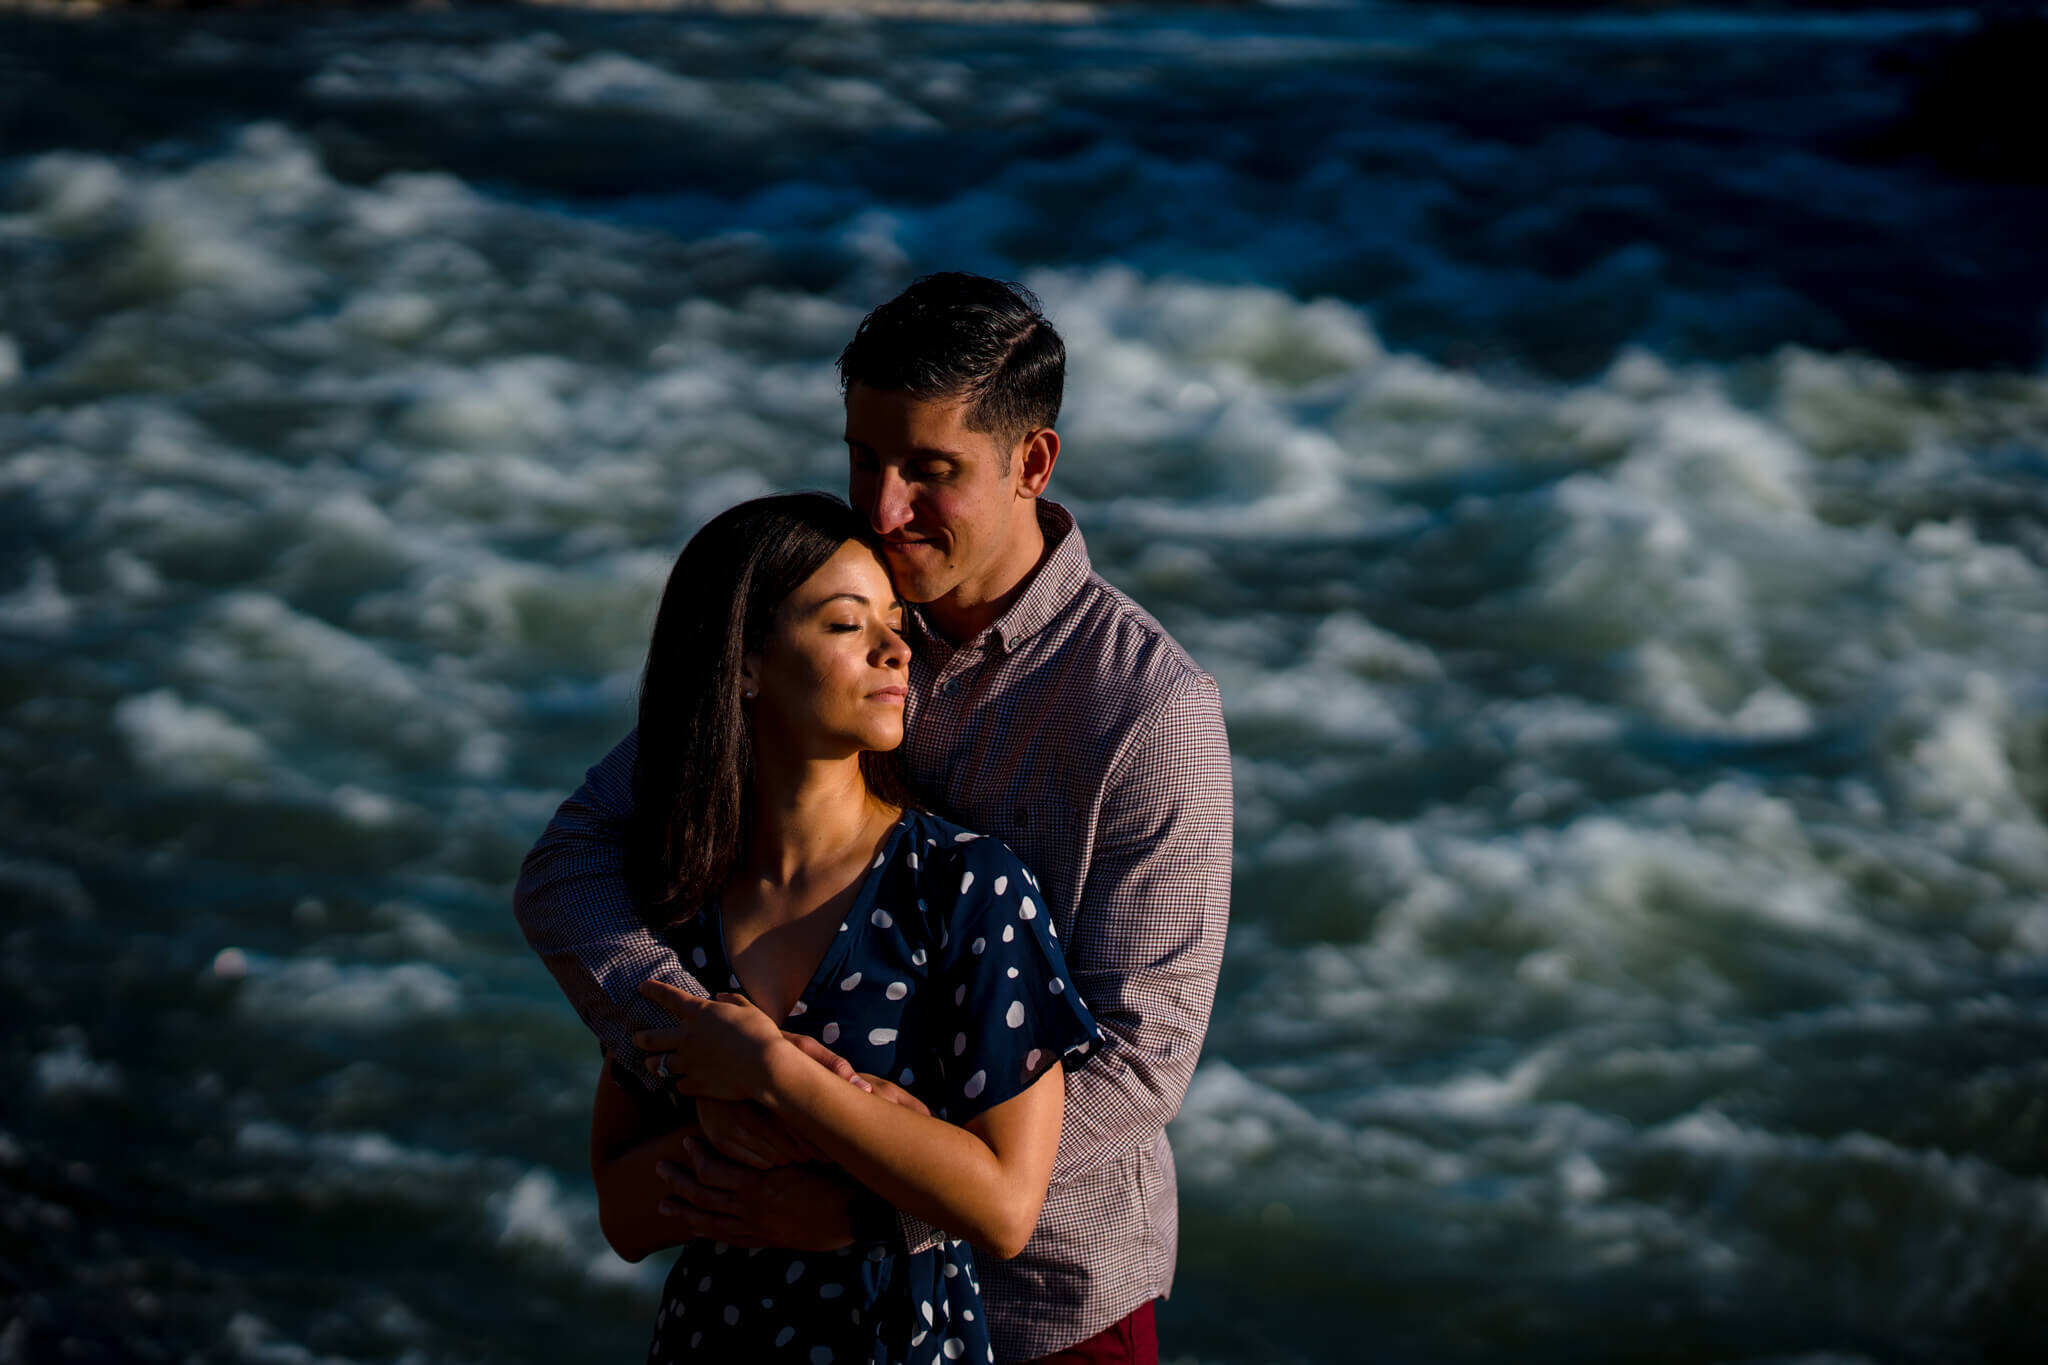 Great-Falls-Engagement-Adventure-Session-Photography-by-Bee-Two-Sweet-66.jpg